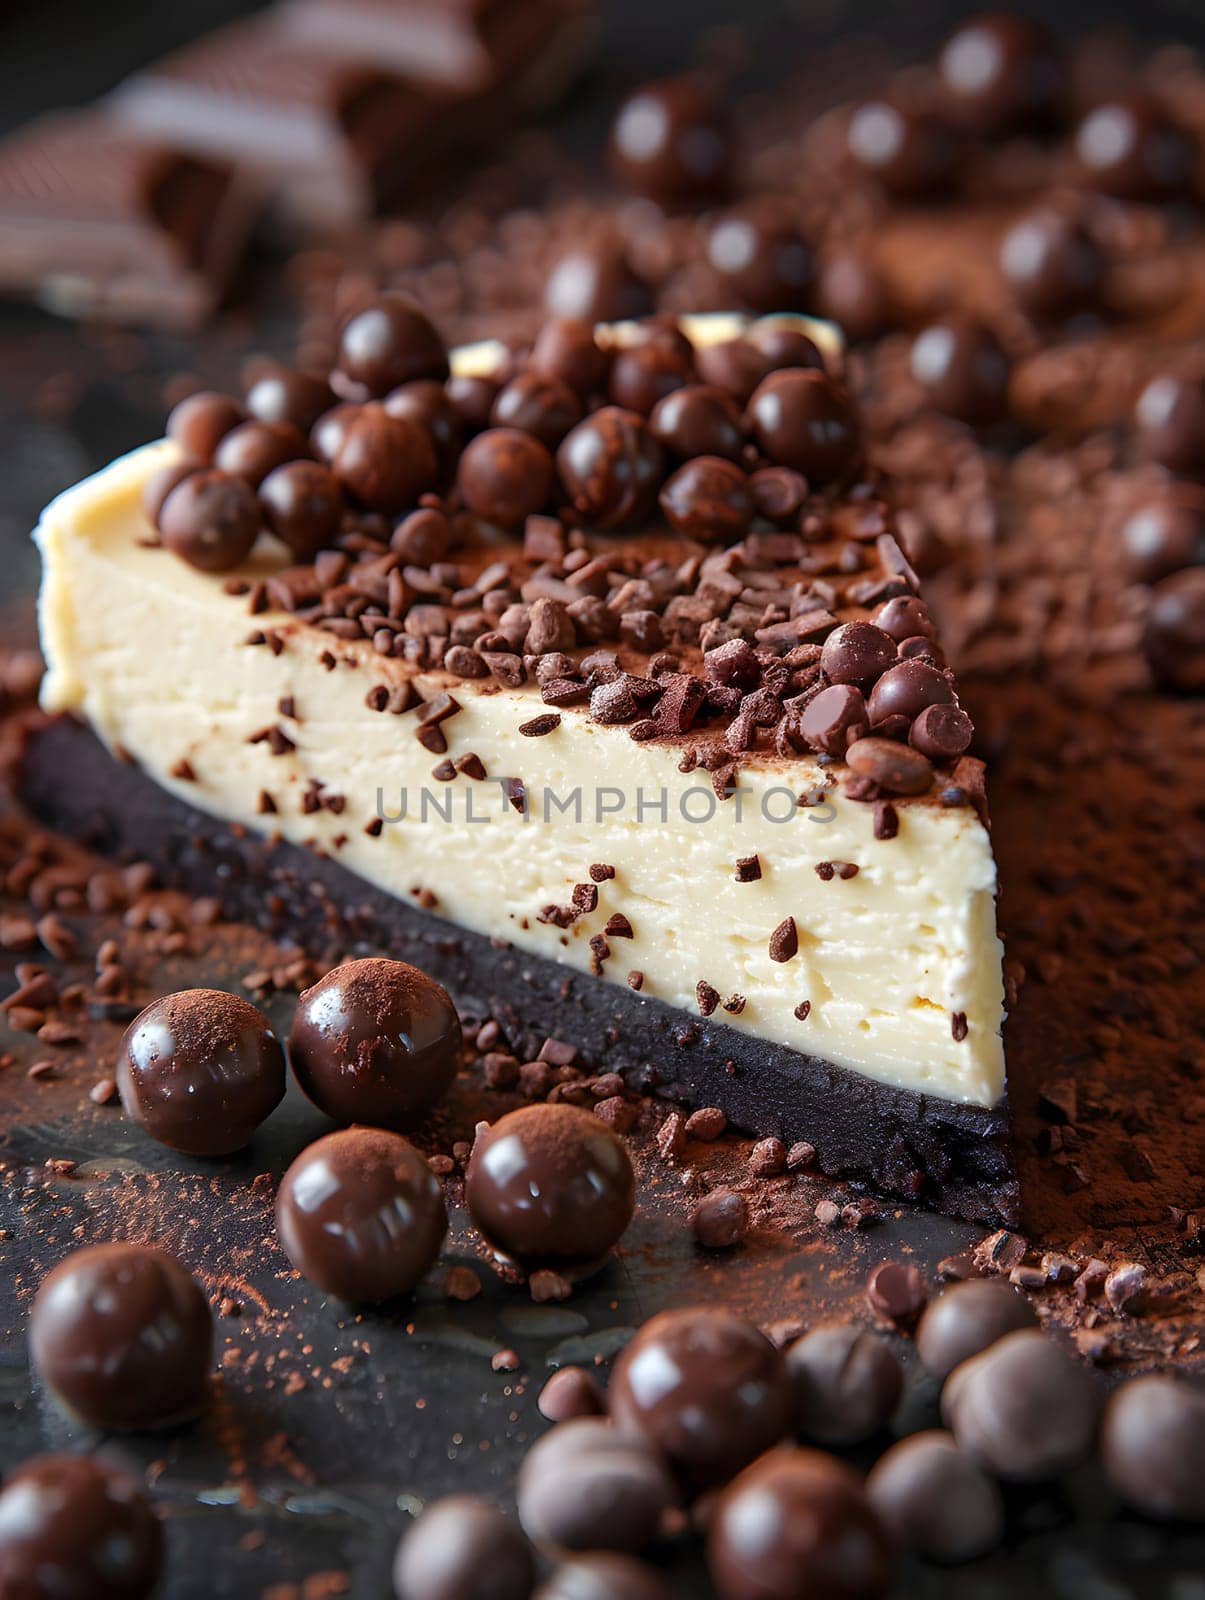 A delectable slice of cheesecake adorned with chocolate sprinkles, a delightful treat for your taste buds. A mouthwatering combination of creamy baked goods and sweet ingredients